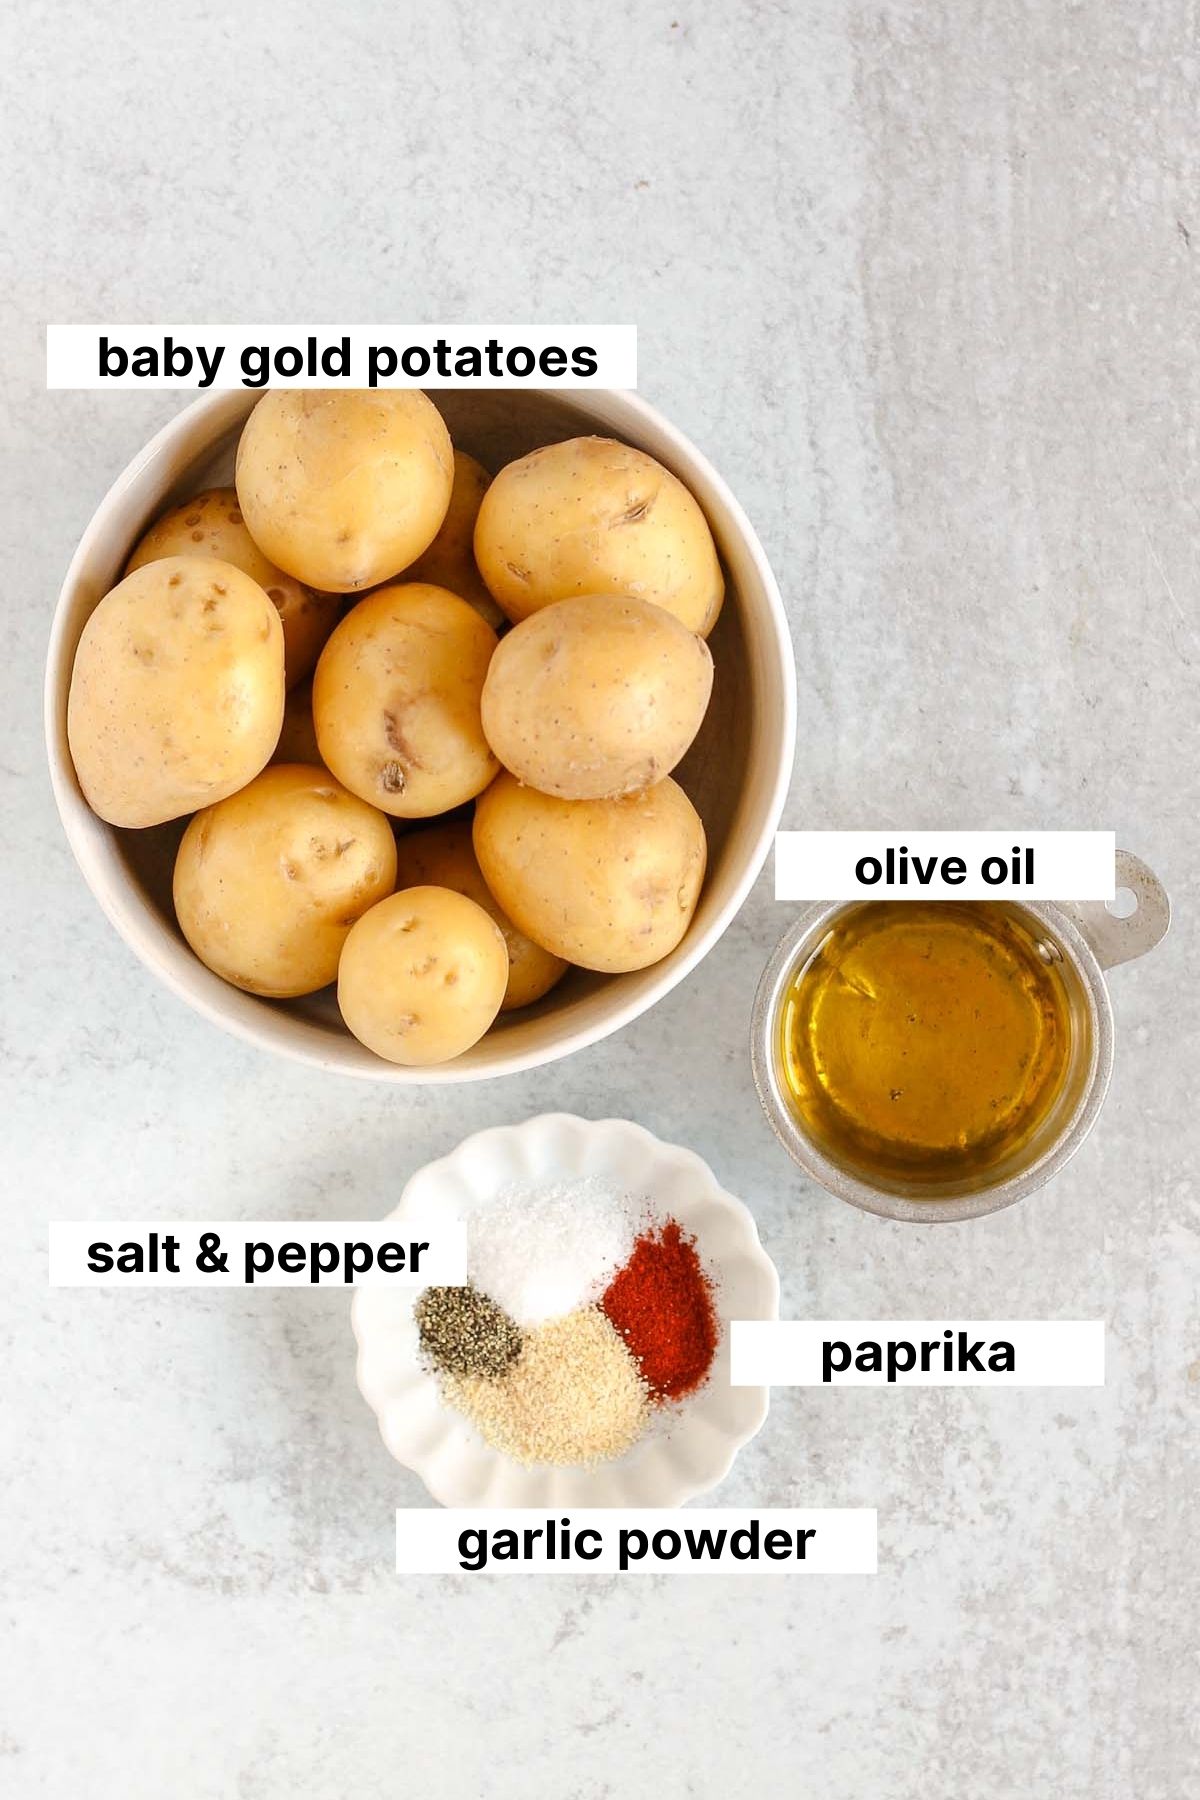 Labeled ingredients for smashed potatoes.